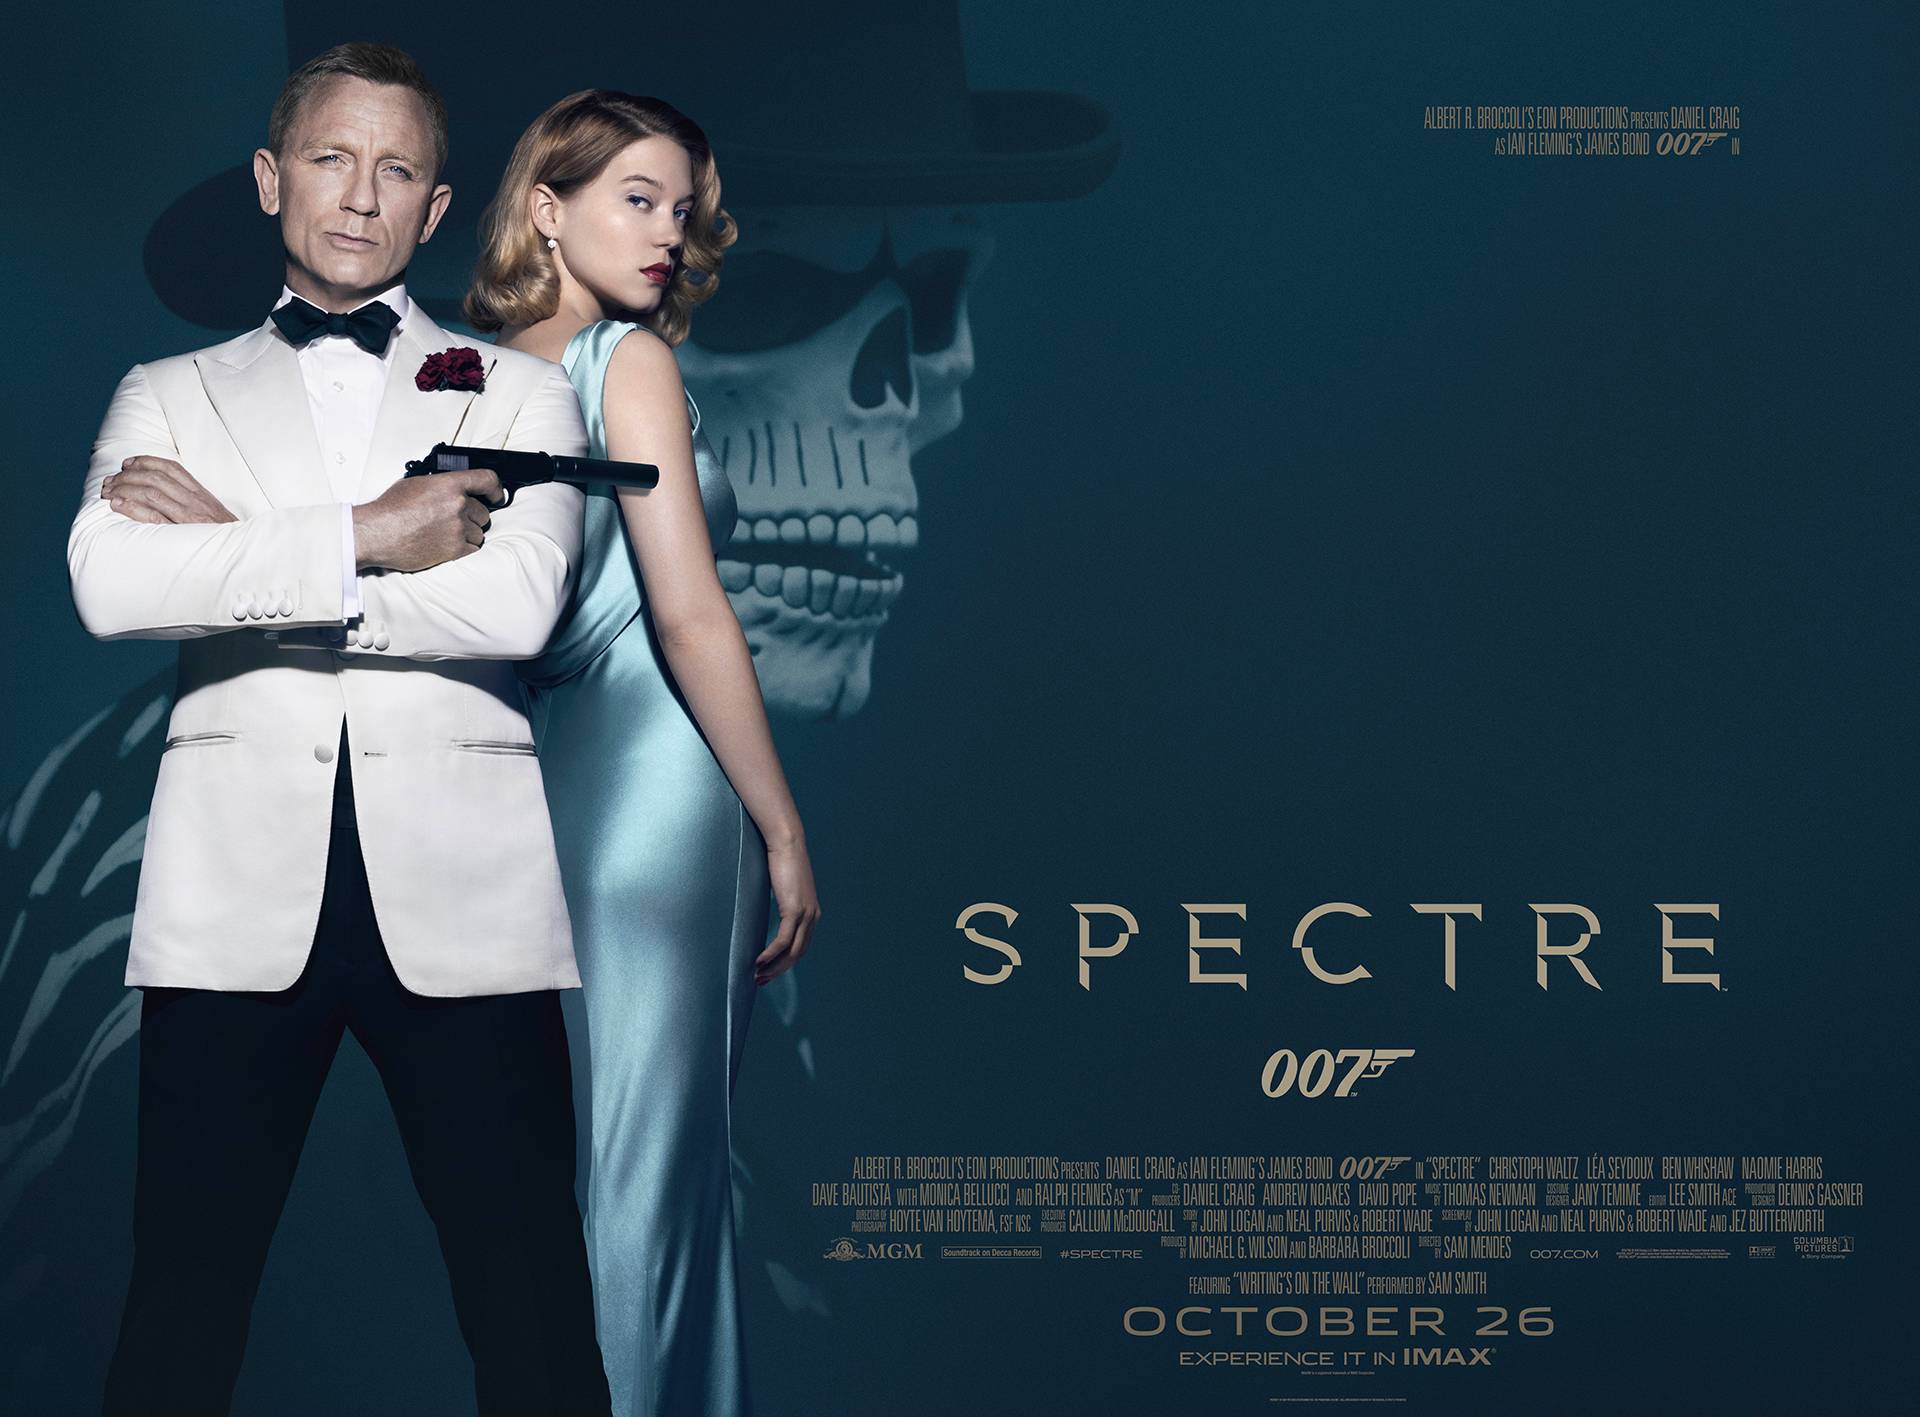 what does spectre stand for in bond